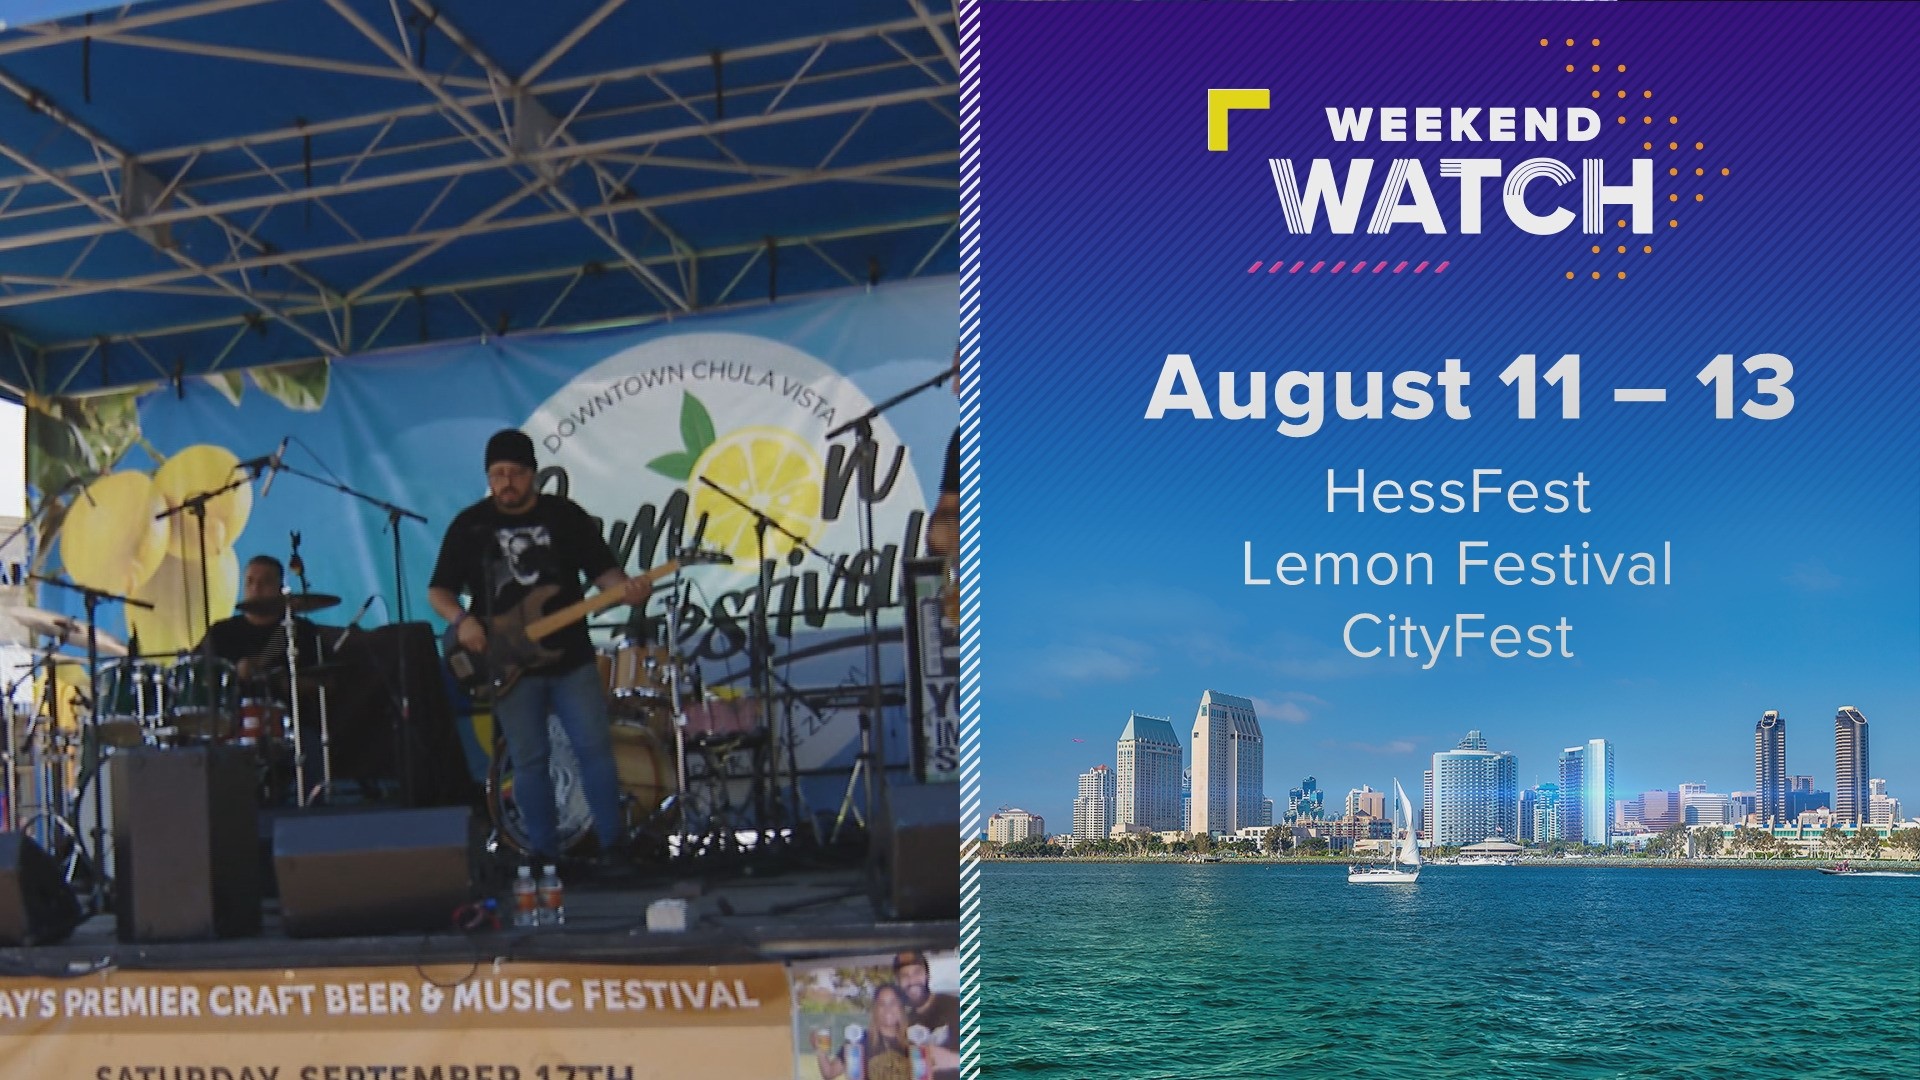 As always, there is so much to do this weekend in San Diego! Here are a few things you won't want to miss.